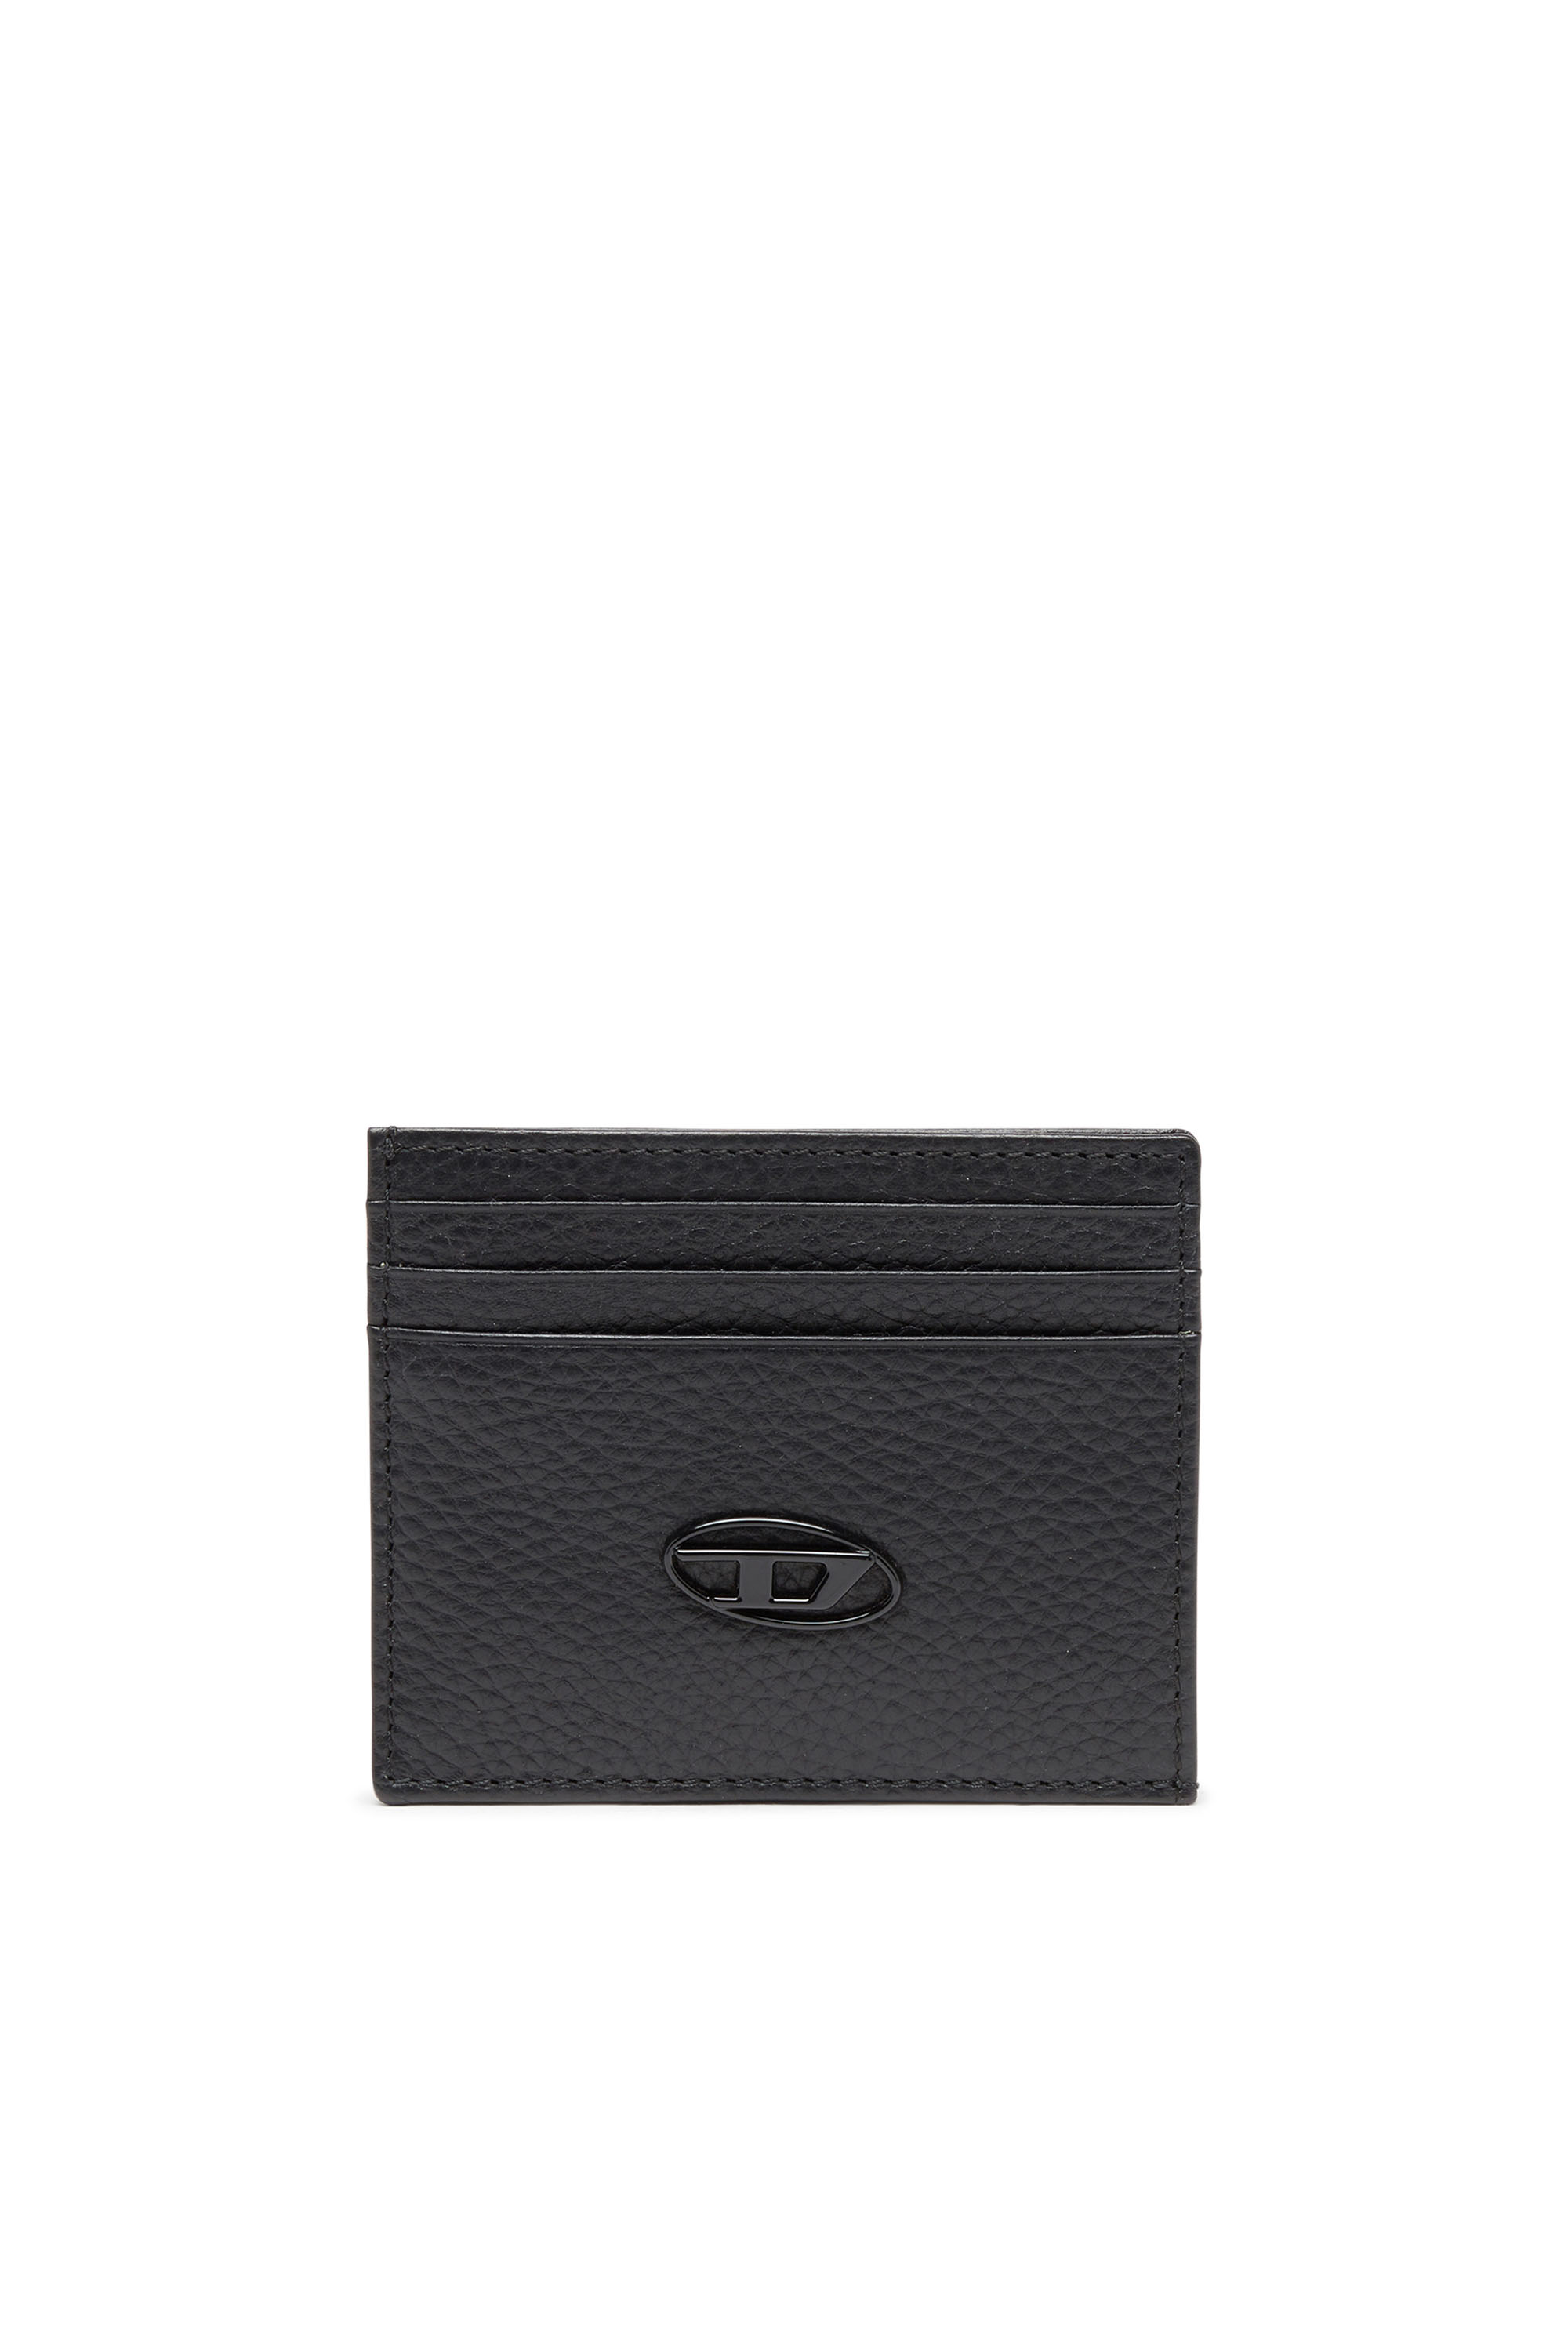 Diesel - CARD CASE, Man Card case in grained leather in Black - Image 2